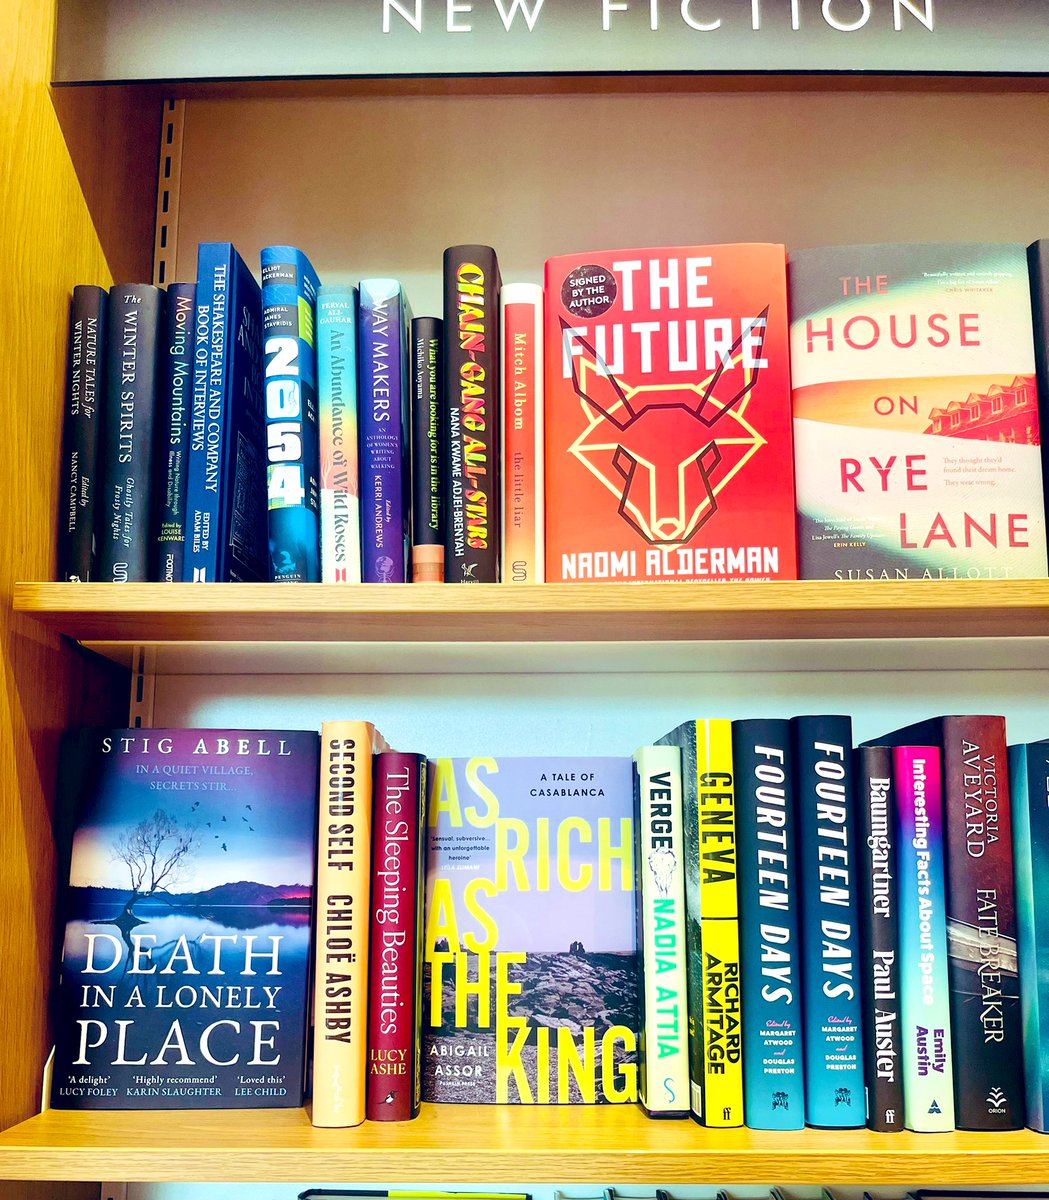 Lovely to see your new book #DeathInALonelyPlace prominently displayed at the front of @WaterstonesVic @StigAbell 
Really enjoyed #DeathUnderALittleSky beautifully written. Can’t wait to get stuck into this one 📚 #CrimeFiction #FridayMotivation #BooksWorthReading